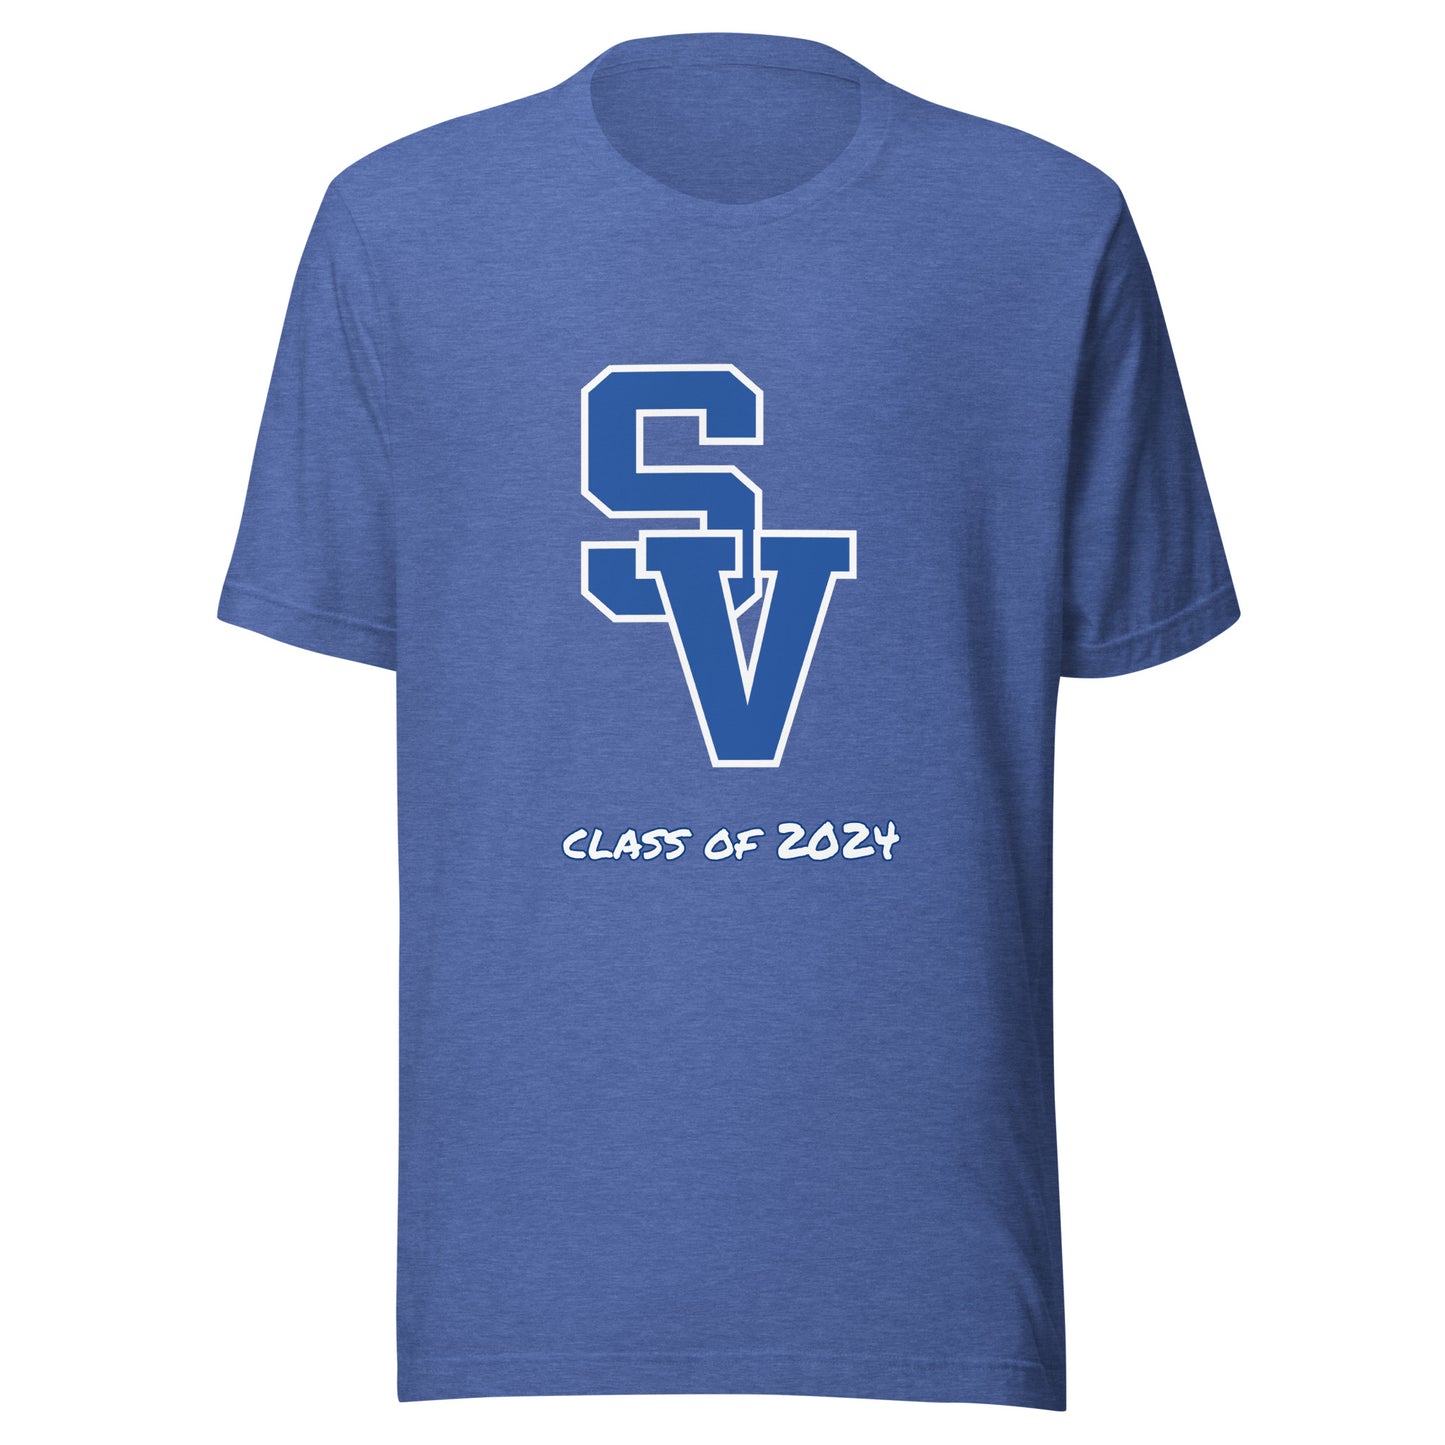 Personalized t-shirt - Shelby Valley High School - Big Logo